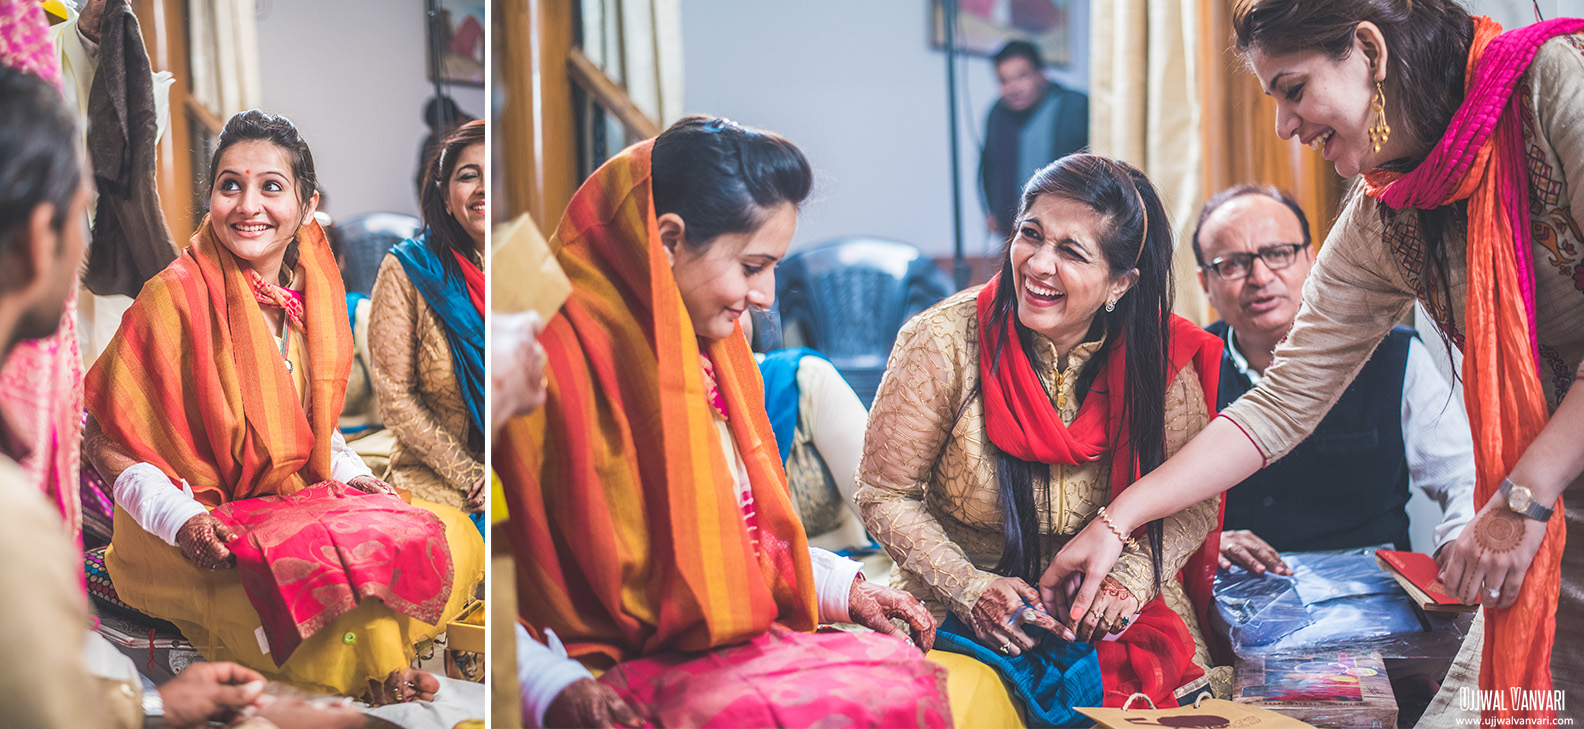 Lucknow Wedding Photography | Purva &amp; Dhawal Lucknow Wedding  | Candid Wedding Photography